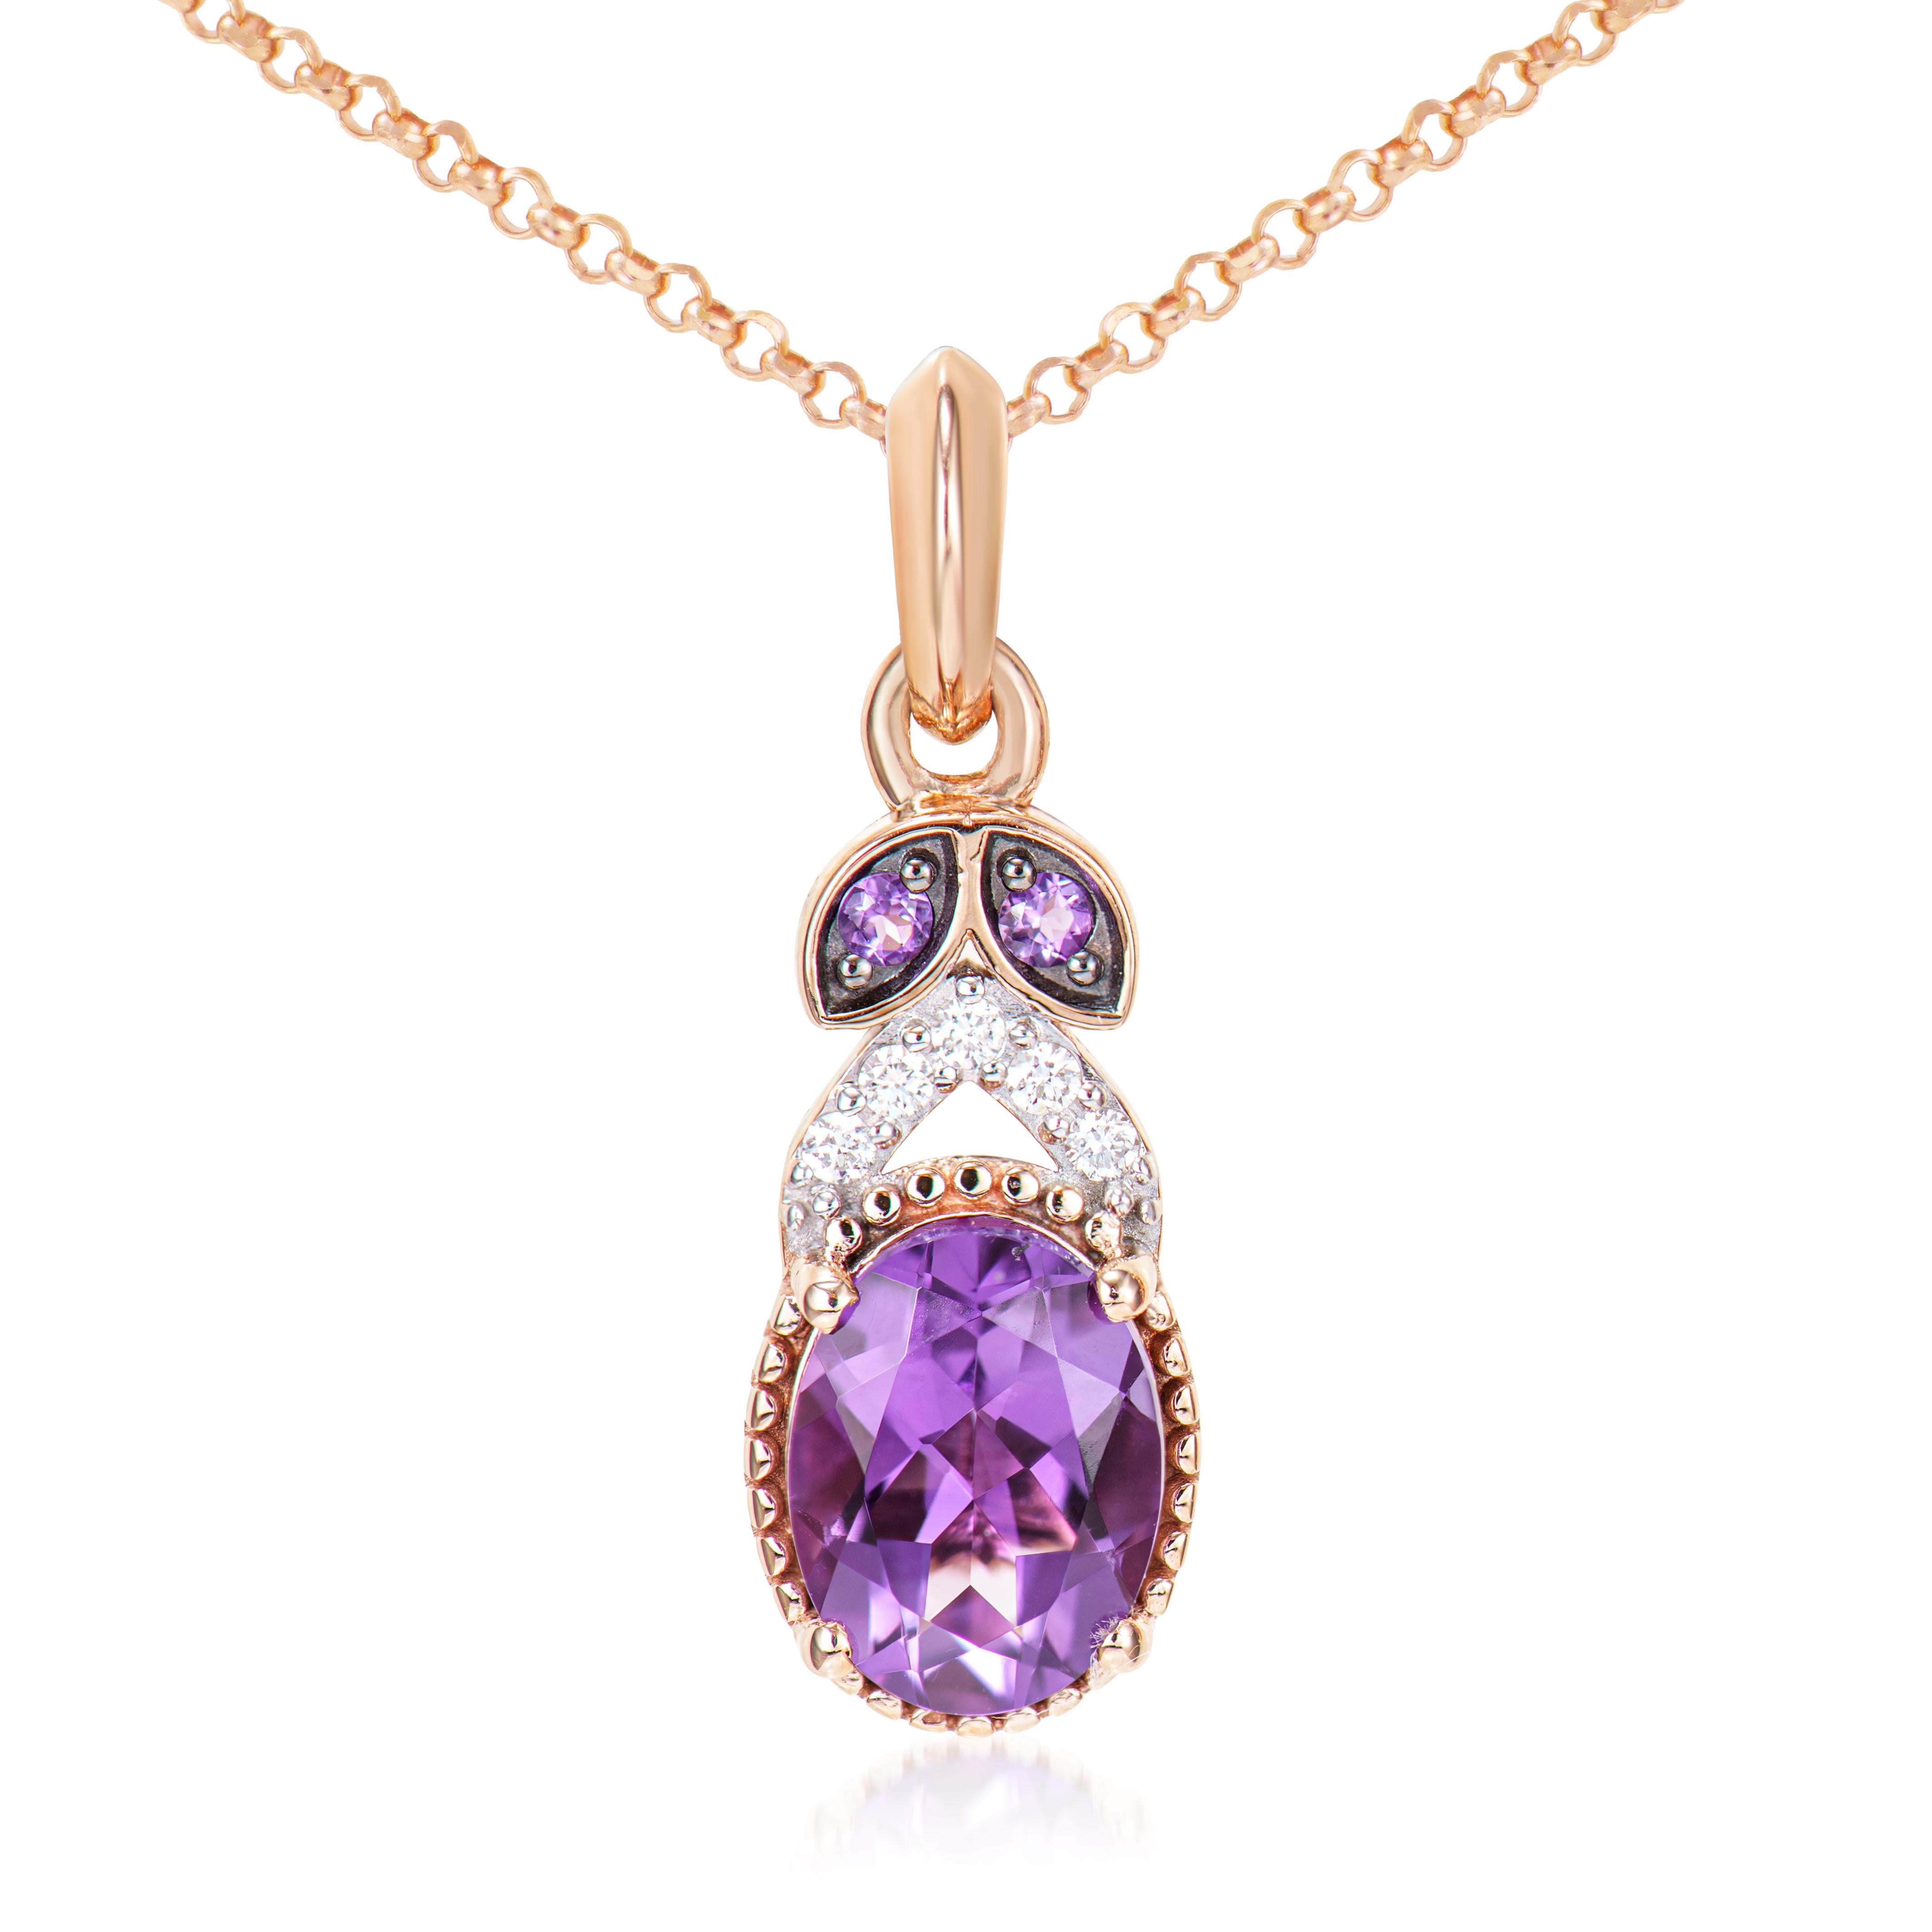 Oval Cut 1.02 Carat Amethyst Pendant in 14Karat Rose Gold with White Diamond. For Sale